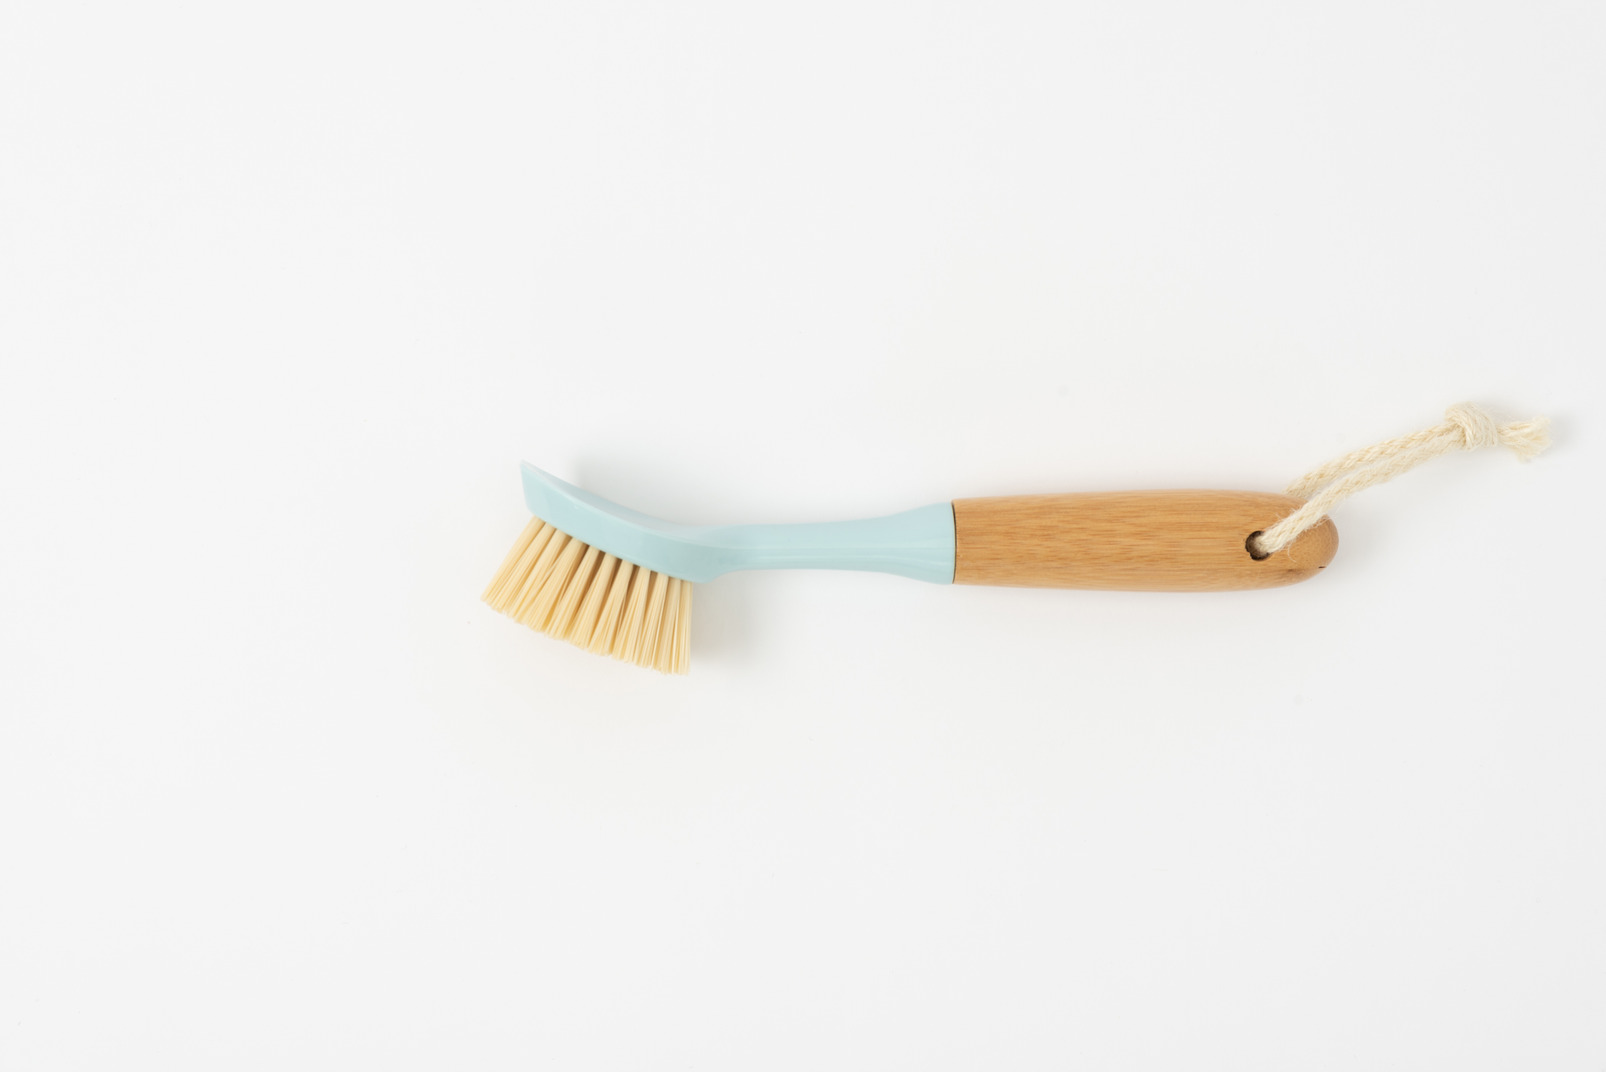 This brush helps you to exfoliate and brush away dead skin cells